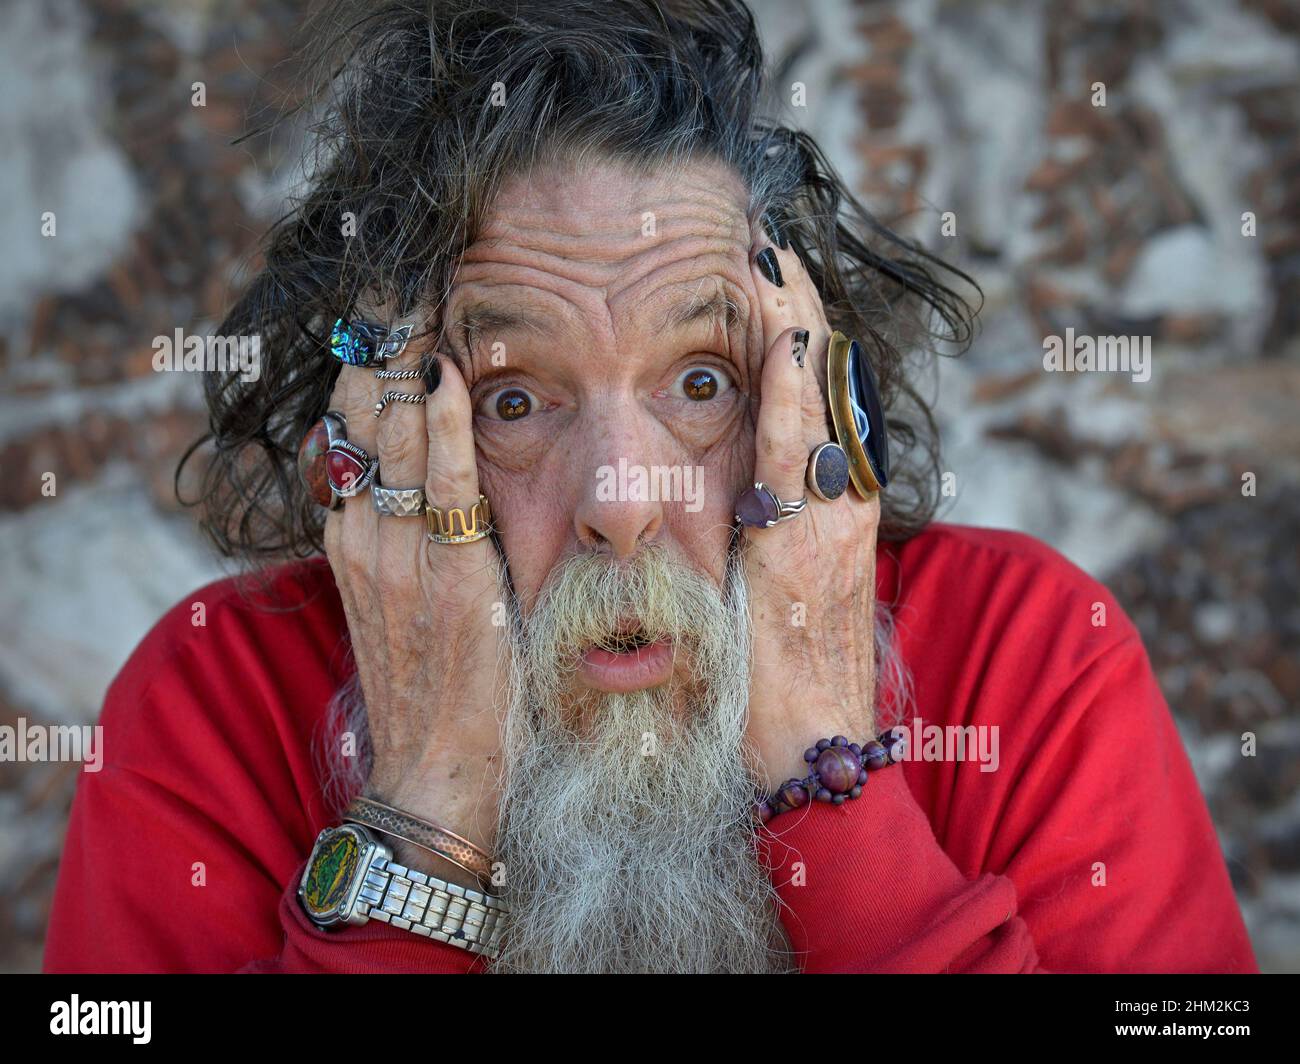 Elderly Caucasian man covers his ears with his beringed hands and expresses the hear-no-evil gesture pose of the famous Three Wise Monkeys. Stock Photo